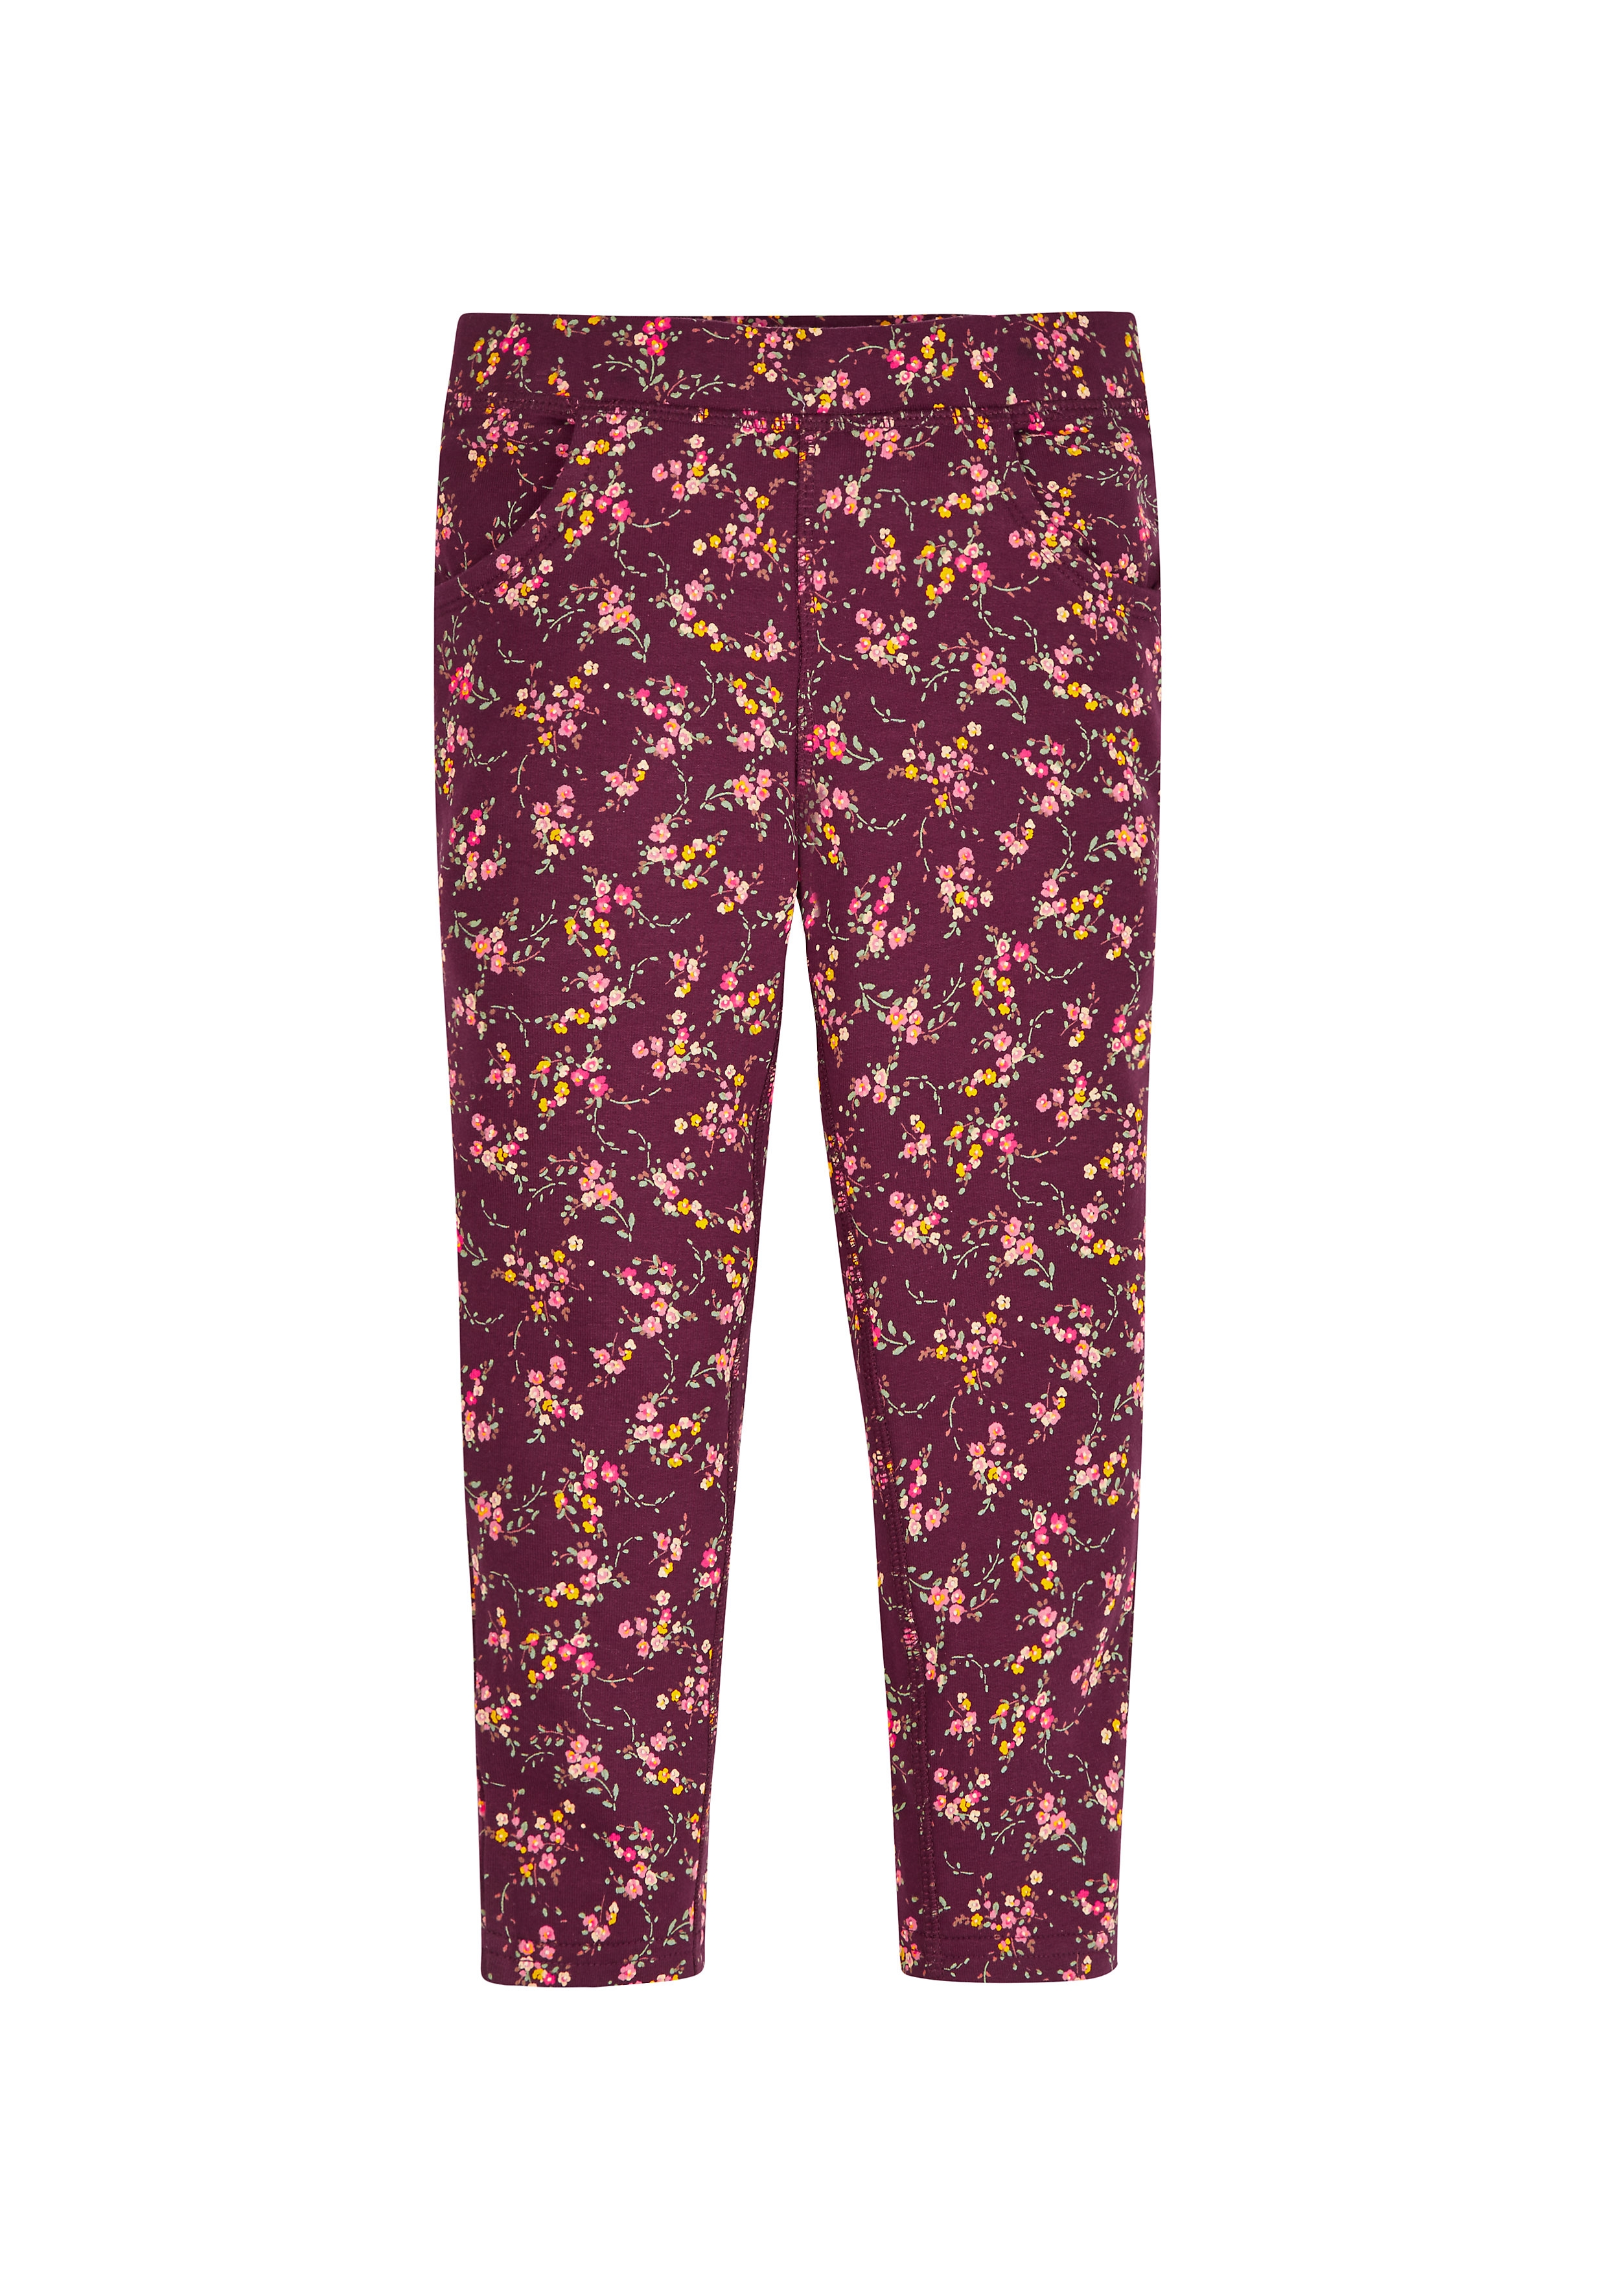 Mothercare | Girls Trousers Floral Print - Burgundy